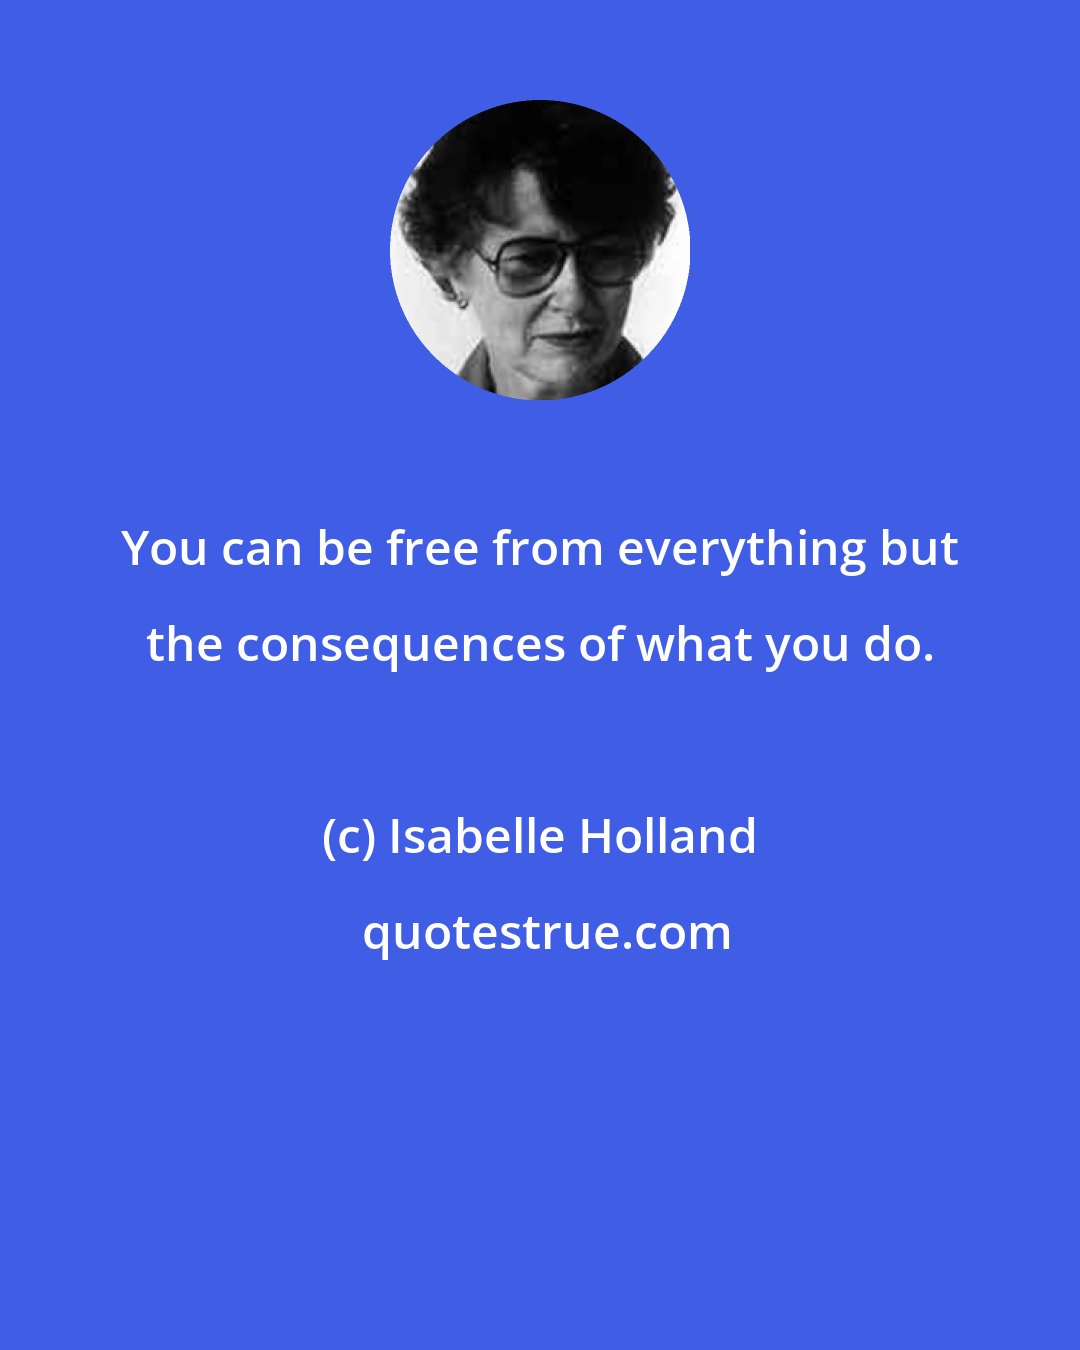 Isabelle Holland: You can be free from everything but the consequences of what you do.